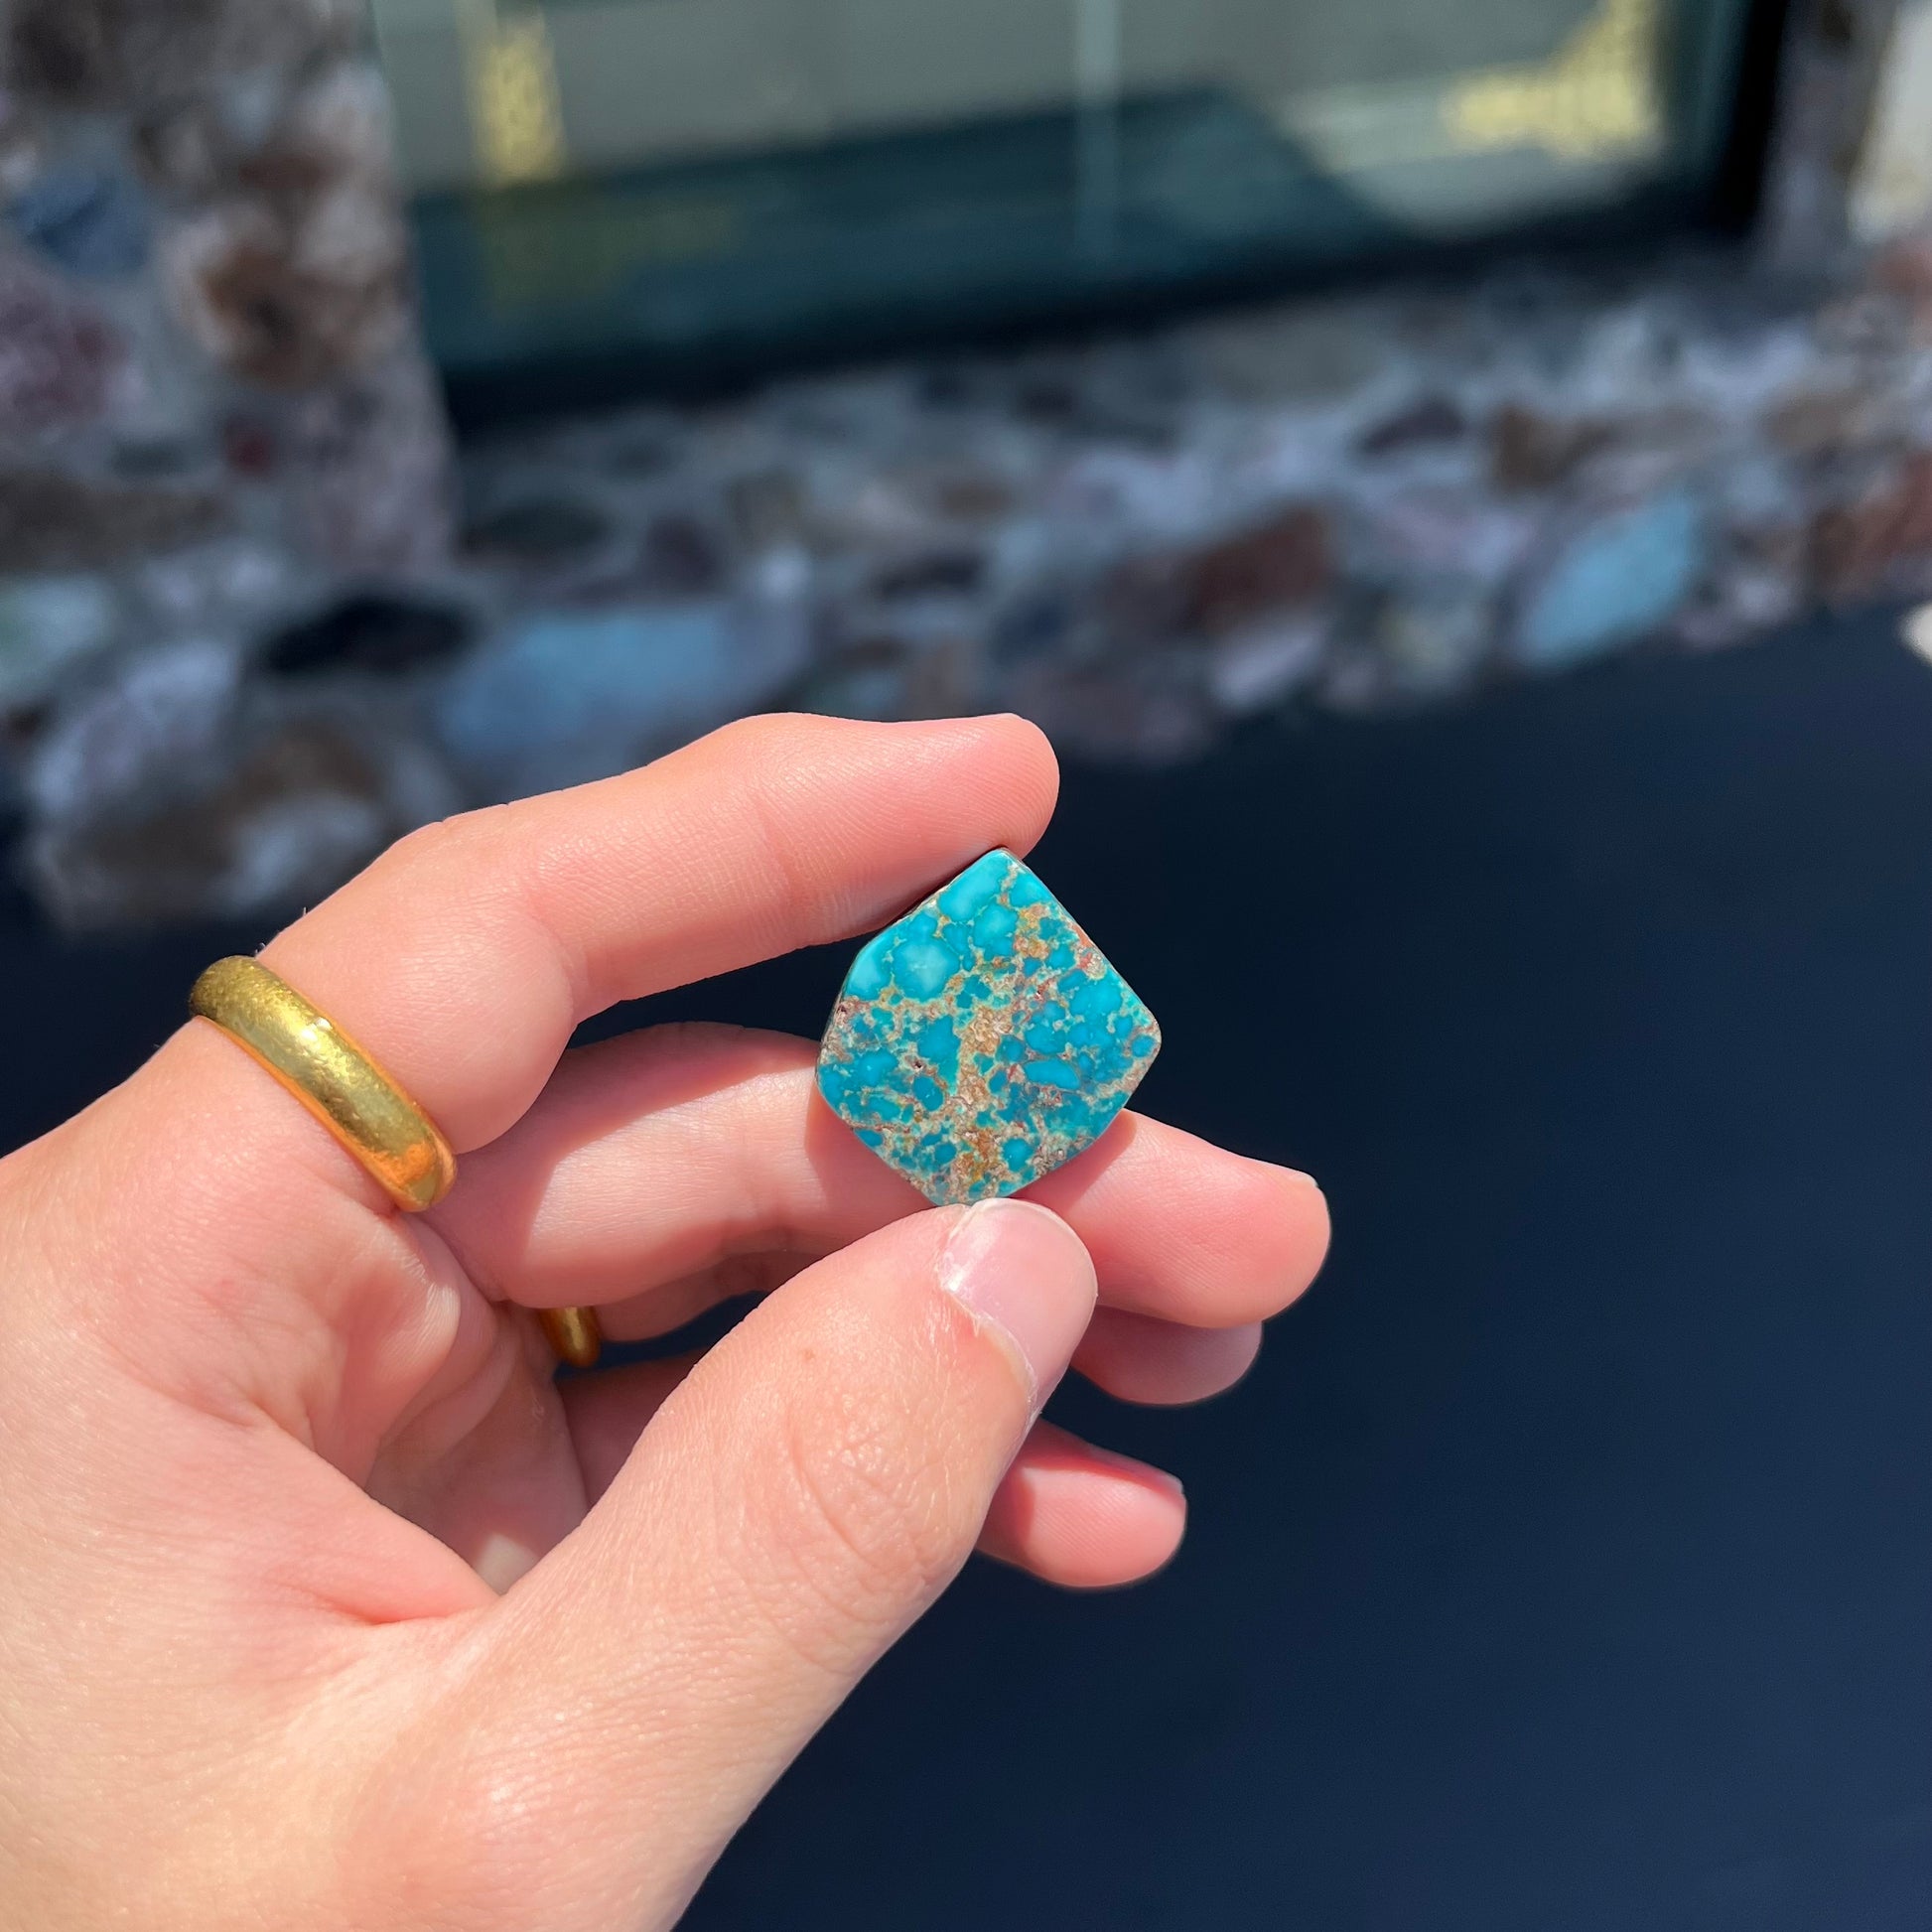 A loose turquoise stone from the Godber-Burnham mine in Lander County, Nevada.